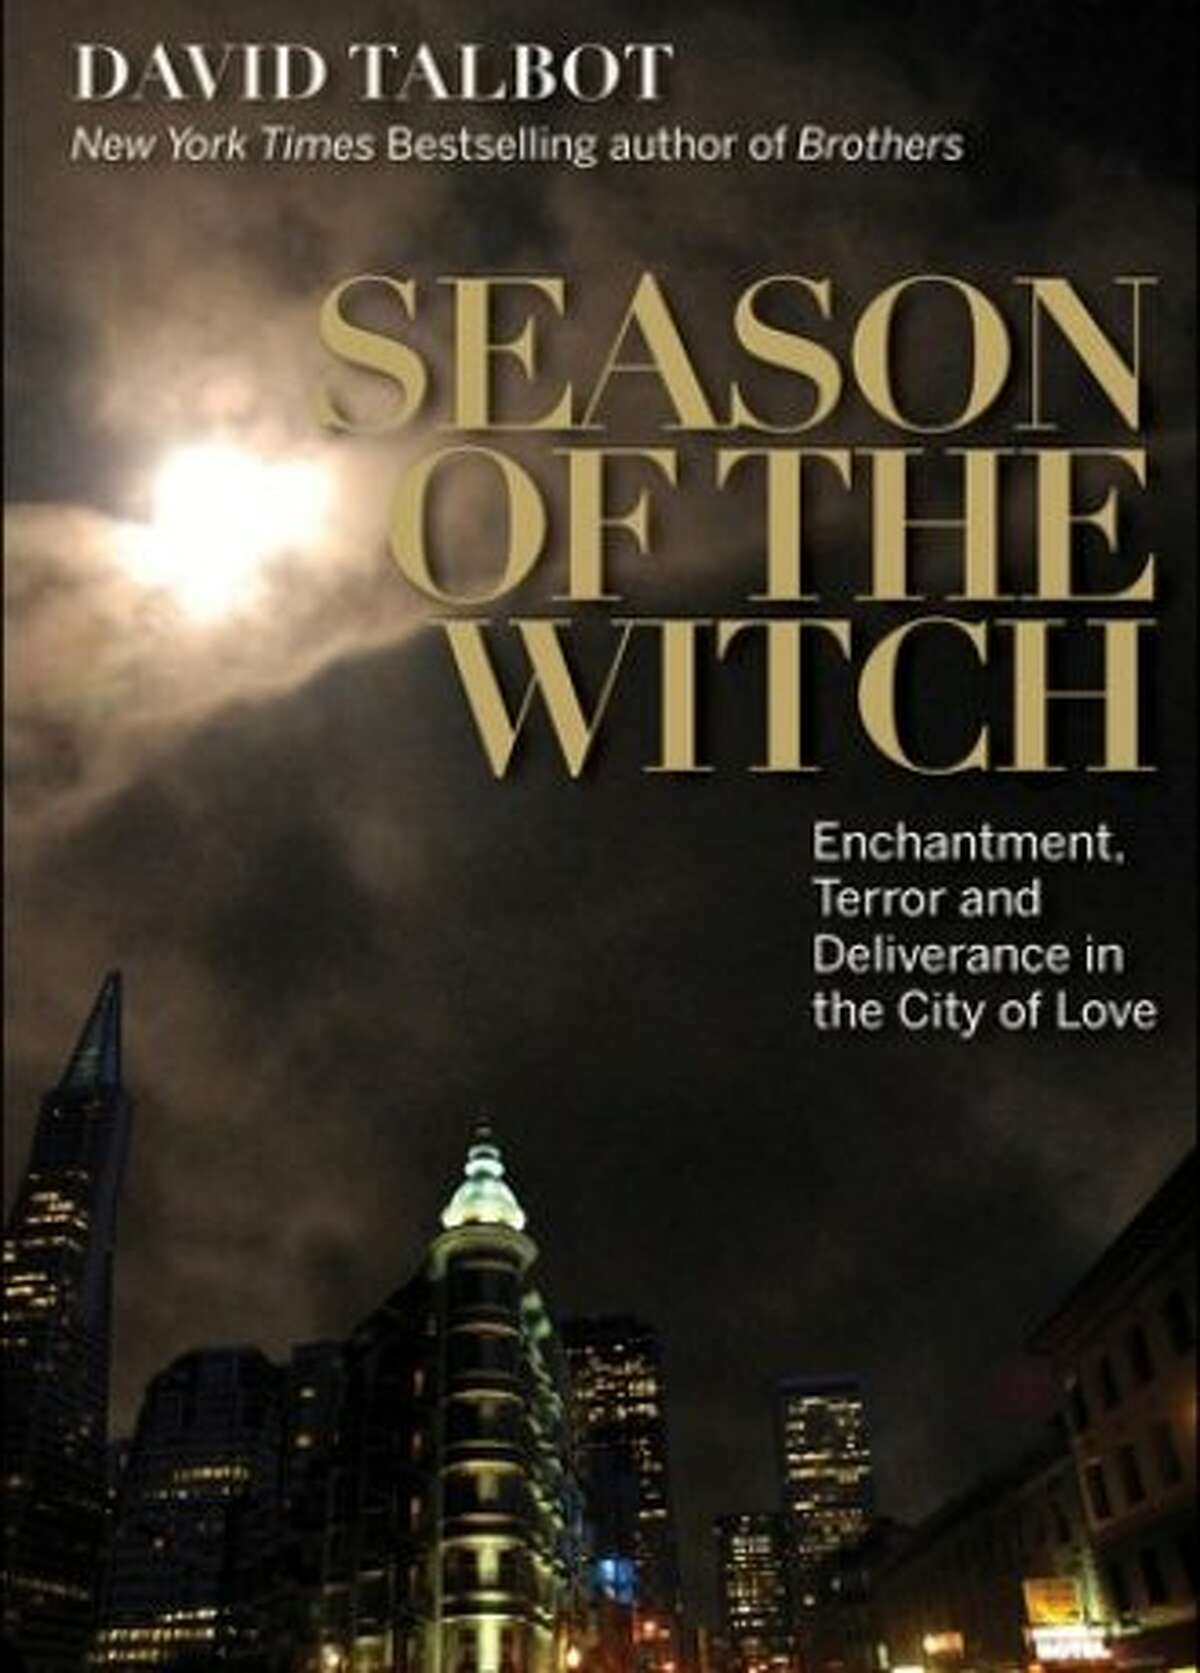 Season of the Witch: Enchantment, Terror and Deliverance in the City of Love, by David Talbot